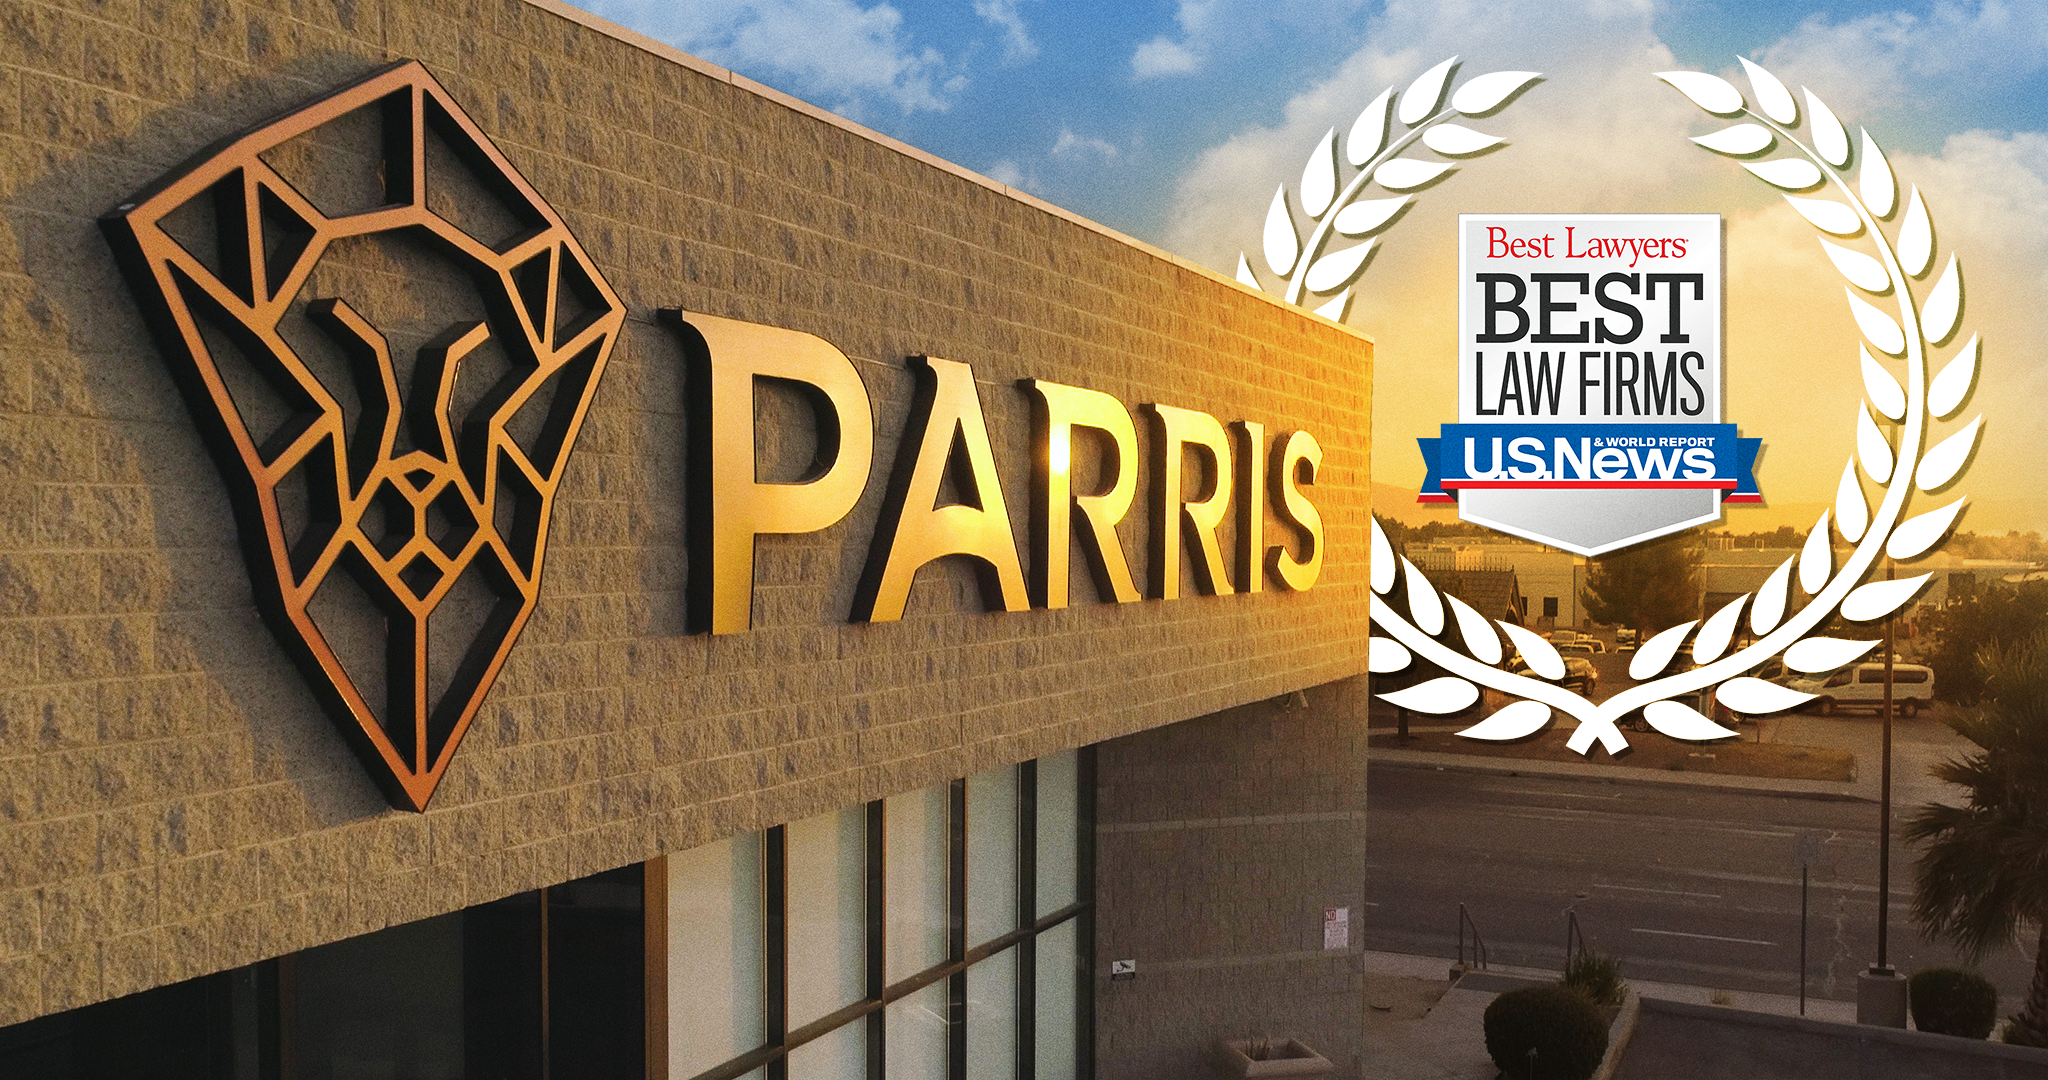 Best Lawyers, Best Law Firms Recognition By Us News - Parris Law Firm - Personal Injury Law Firm